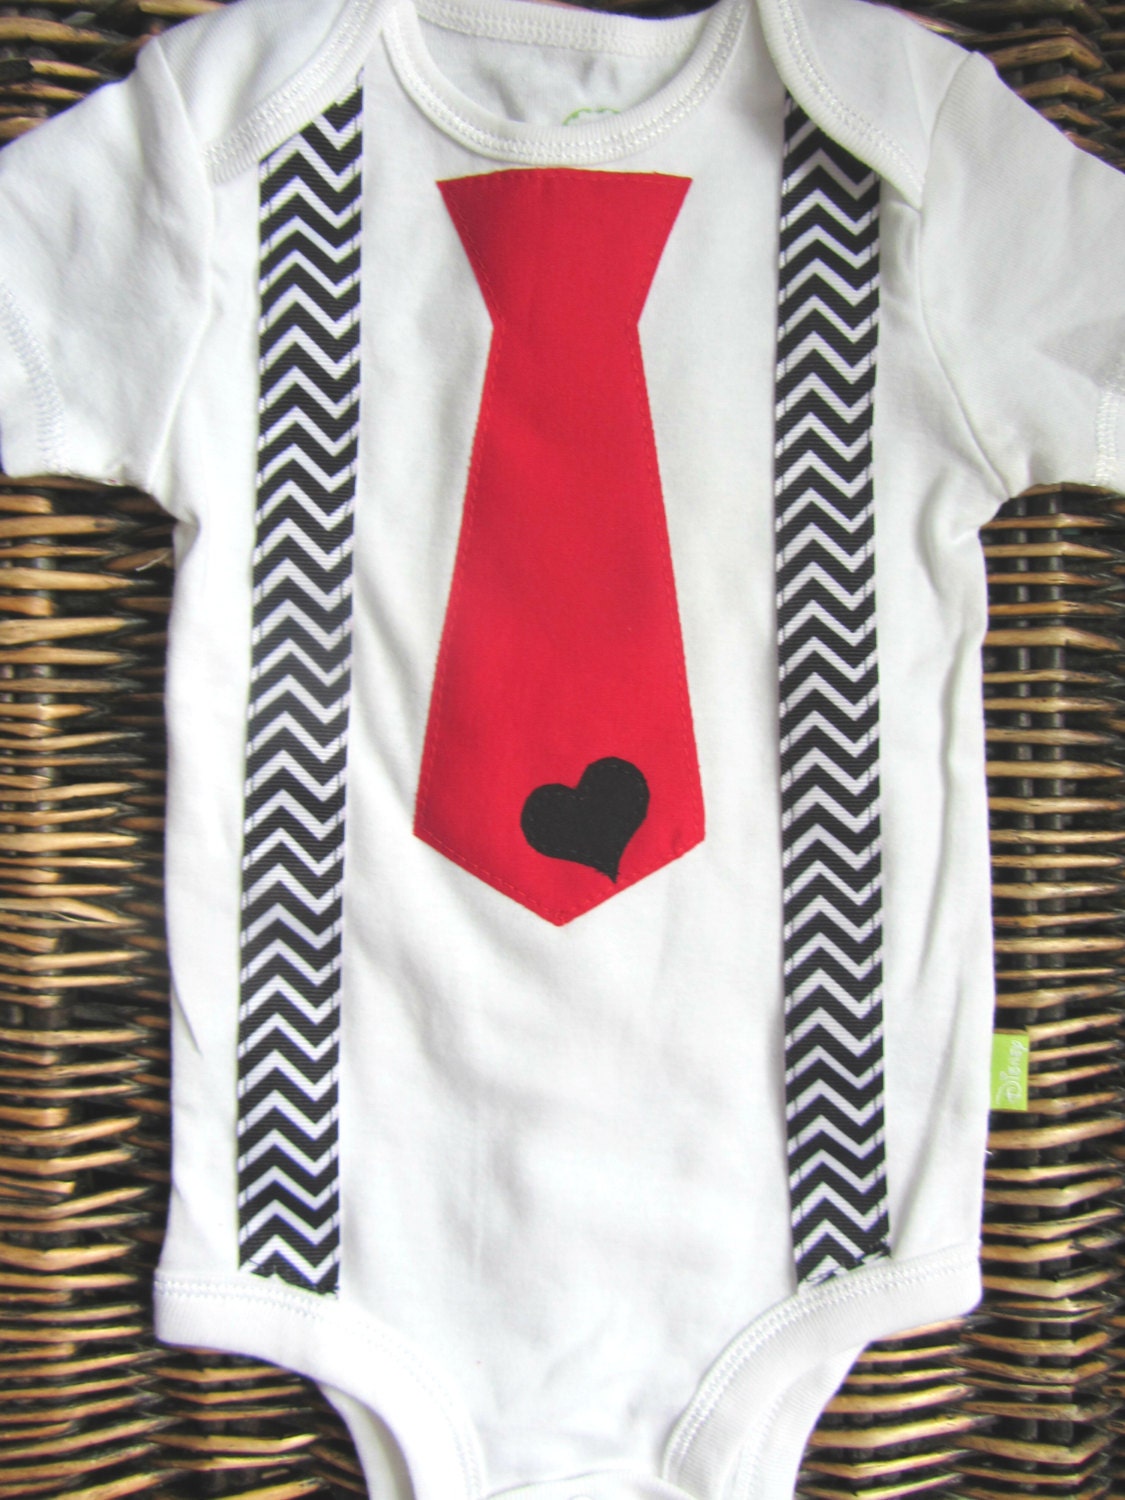 Baby Boy Clothes Black Chevron Suspenders and Red Tie Outfit